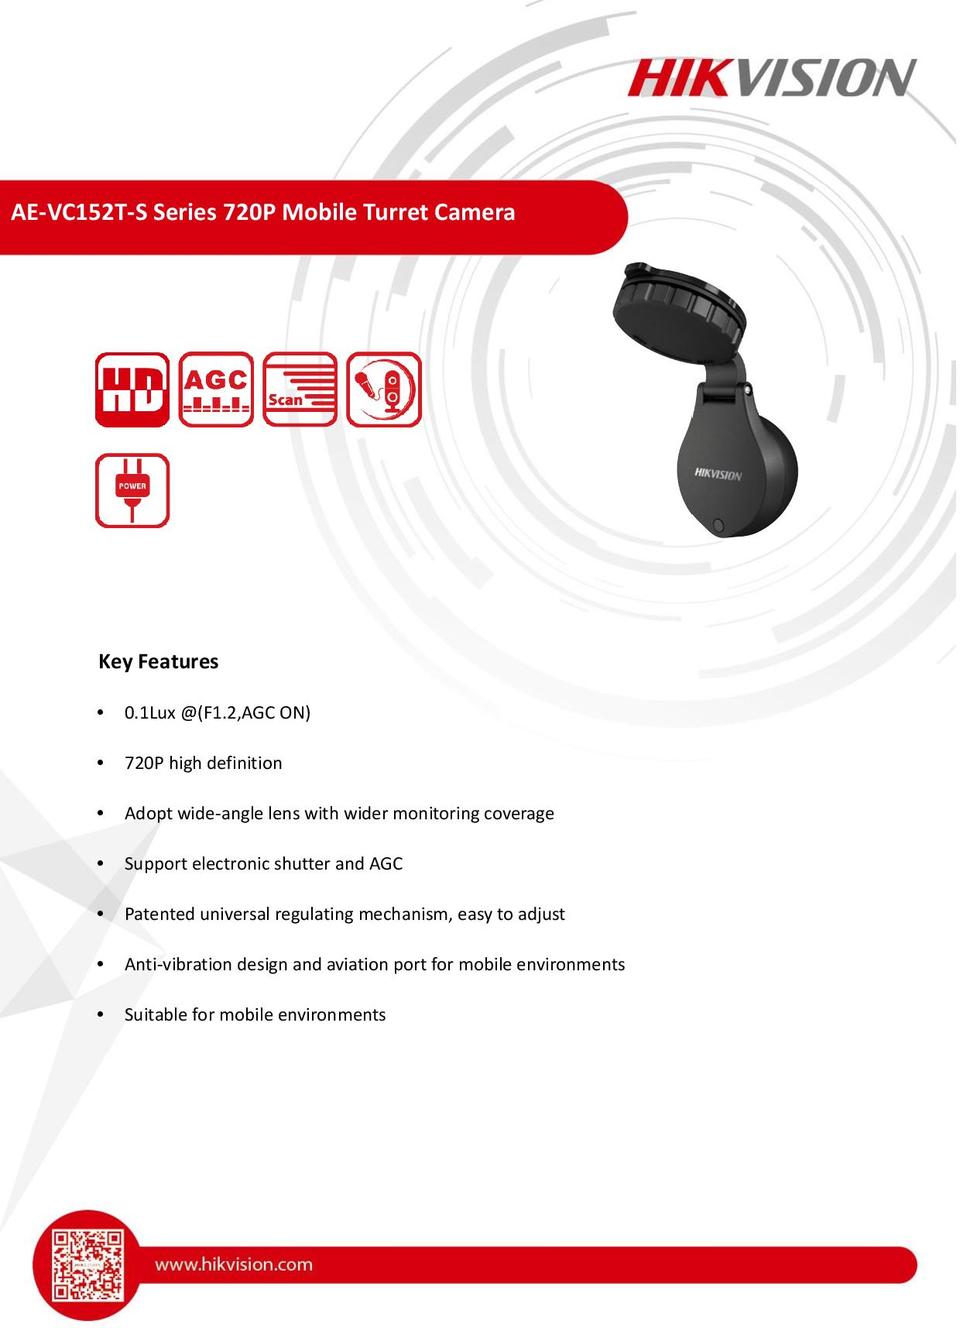 Hikvision AE-VC152T-S HD-TVI Mobile DVR Windscreen Camera with 2.1mm Lens, Microphone 0